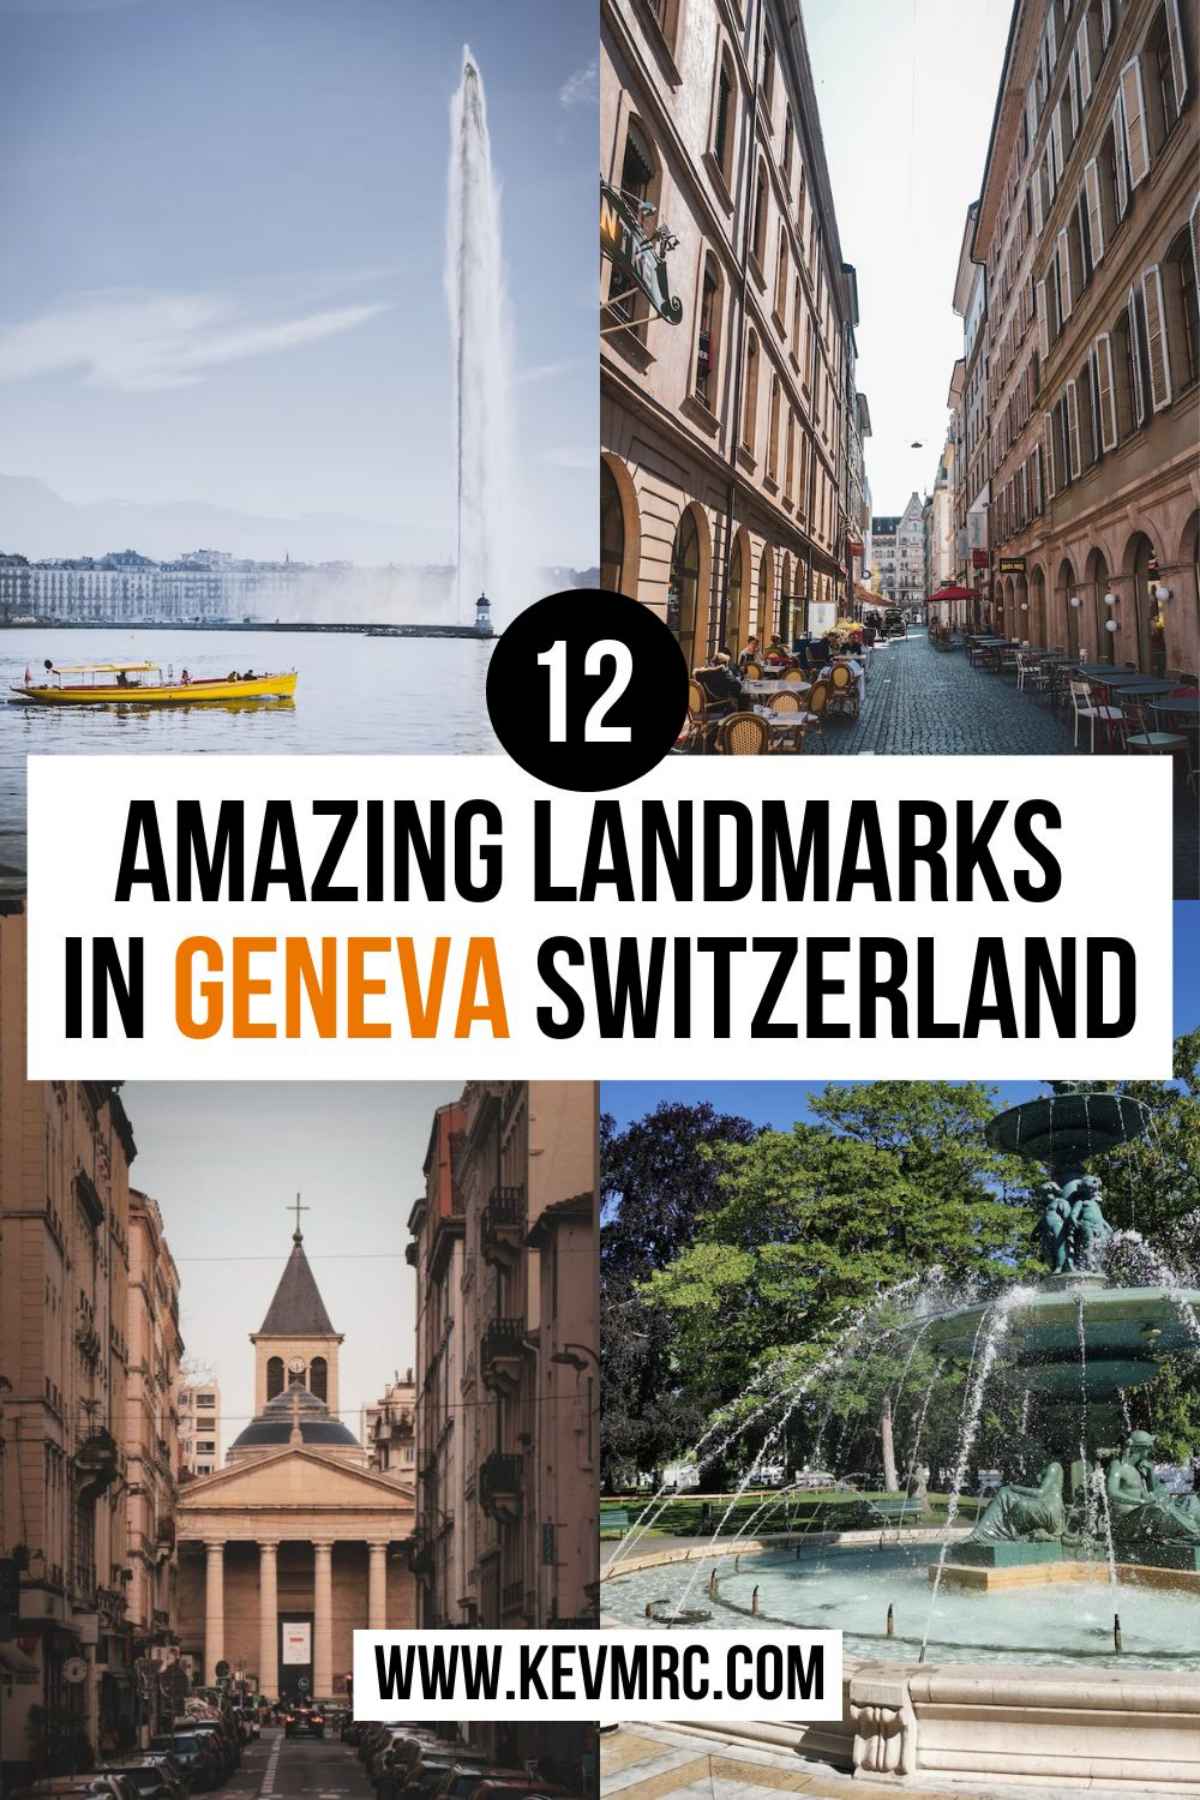 Discover in this post 12 of the most famous landmarks in Geneva Switzerland, with photos, information and free map to easily visit them. geneva switzerland travel | geneva landmarks | geneva monuments | things to do in geneva switzerland #geneva 